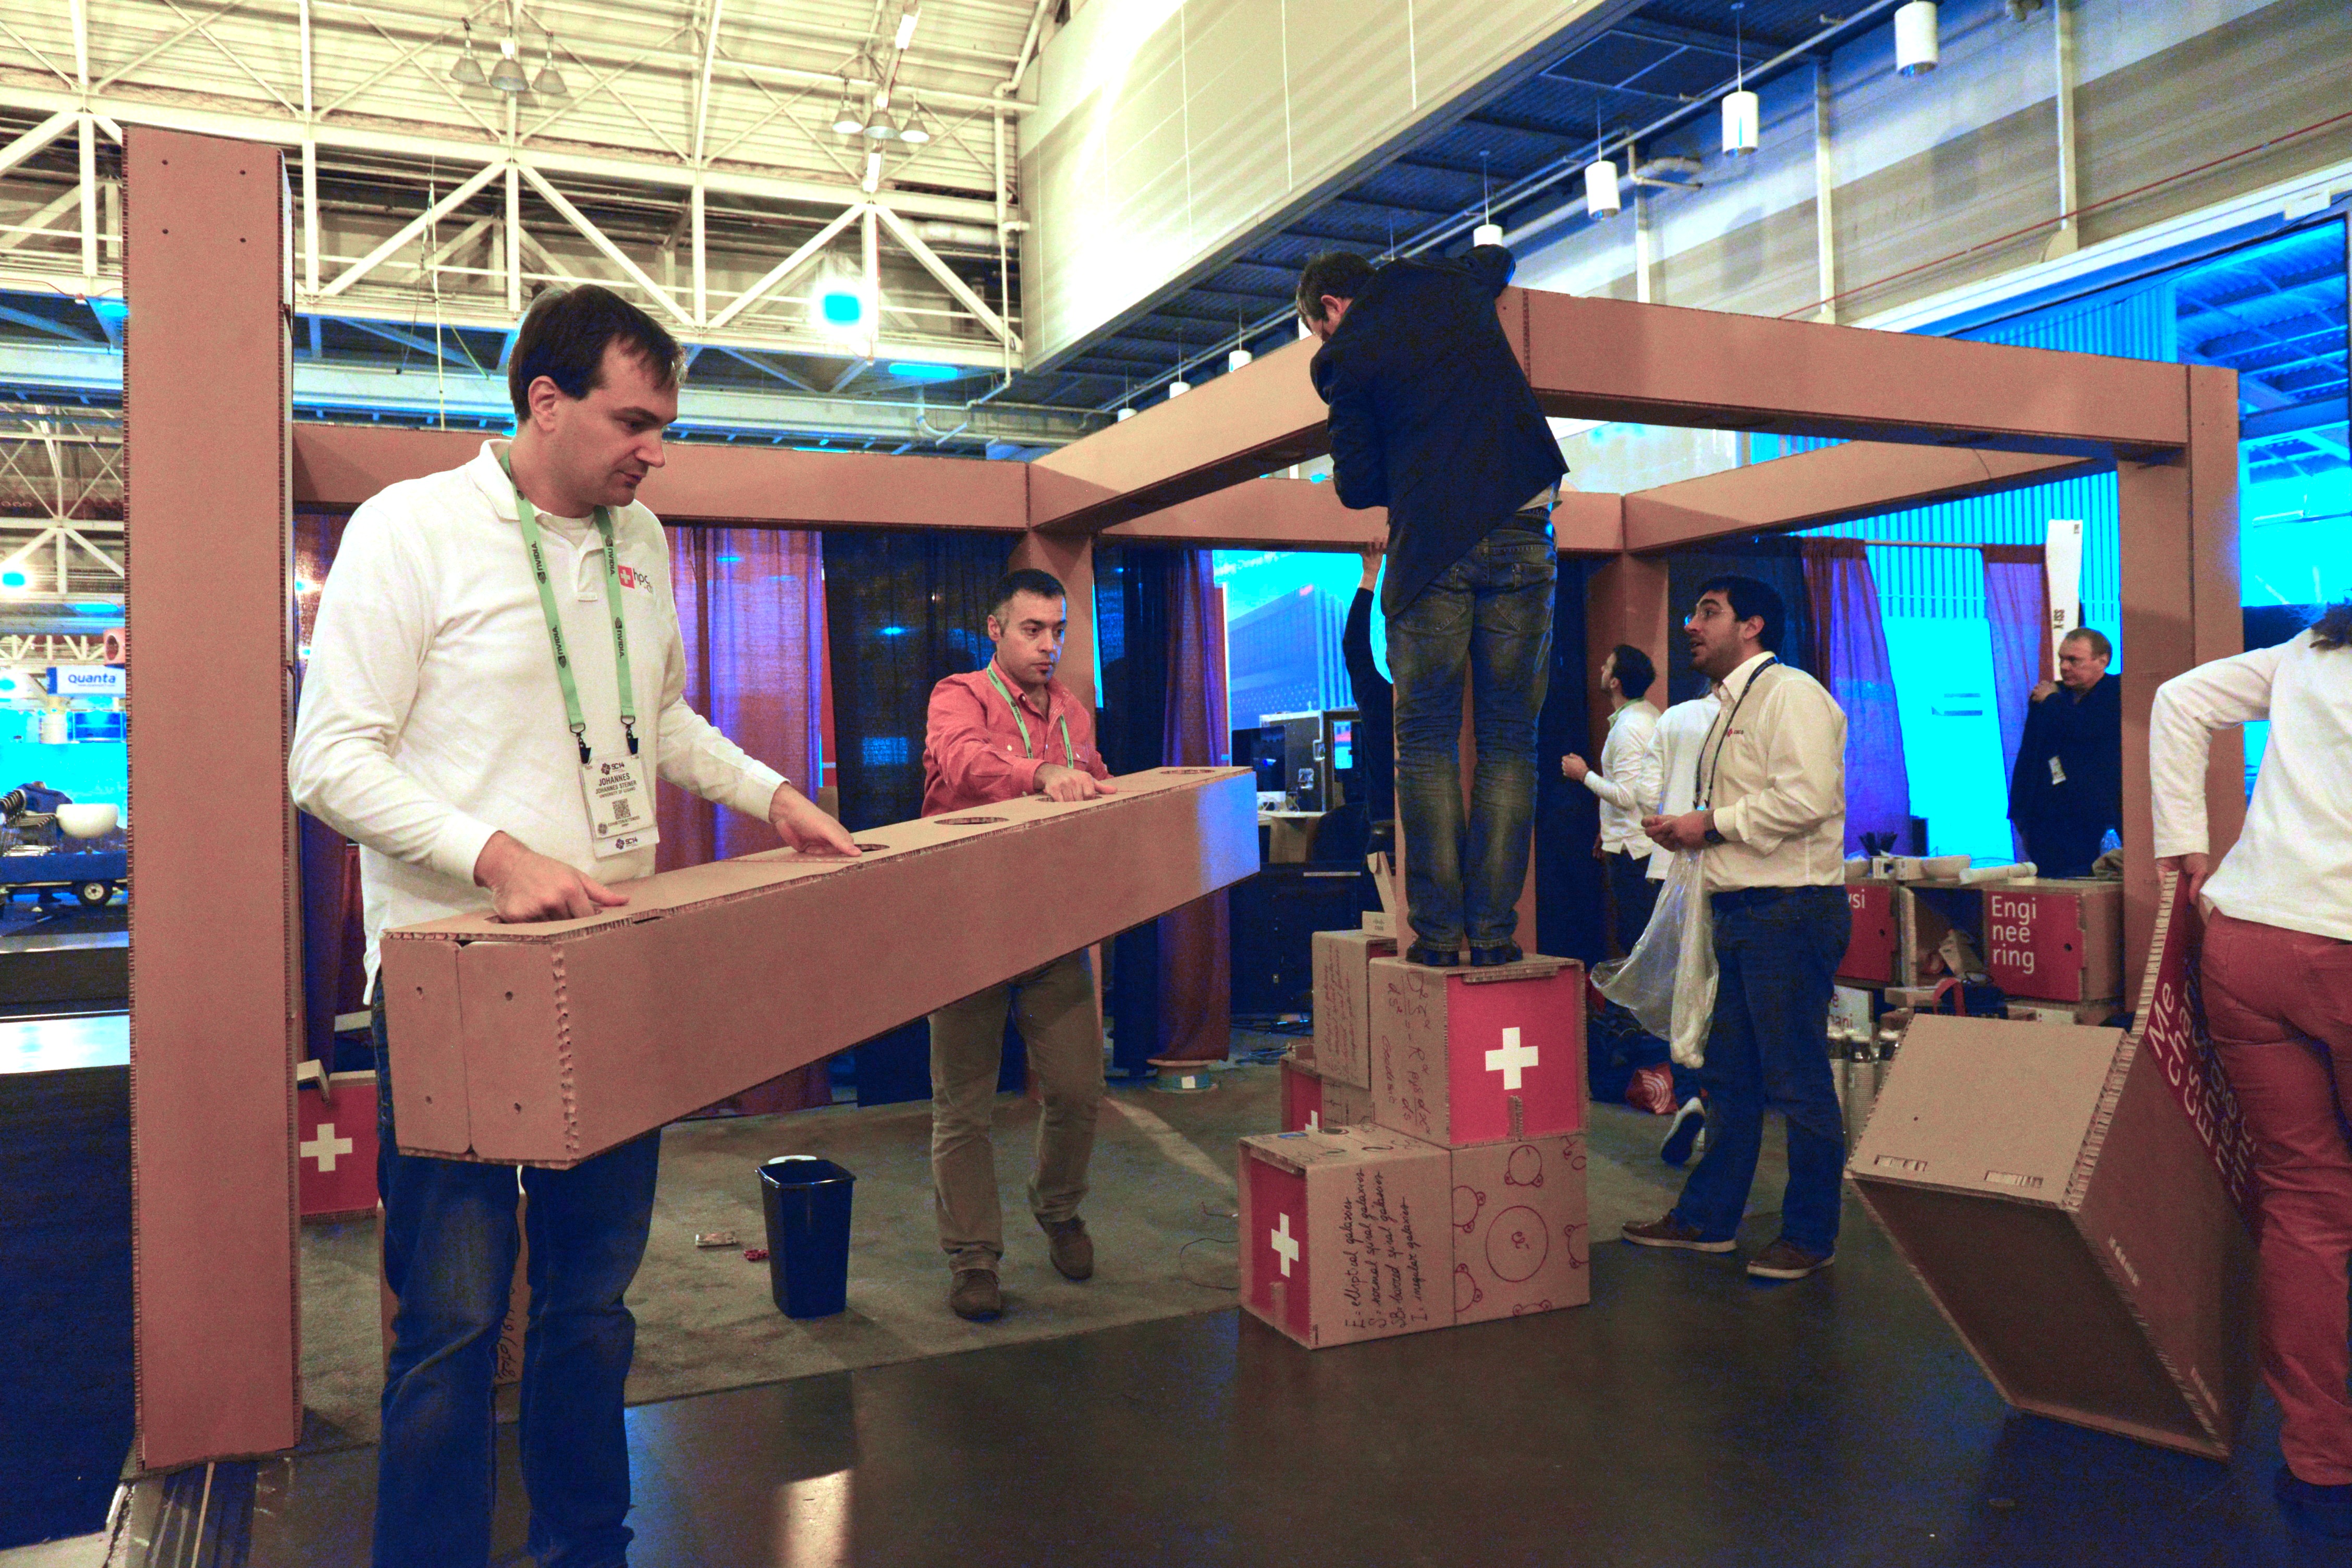 hpc-ch booth dismantle @SC14: Meet you next year in Austin